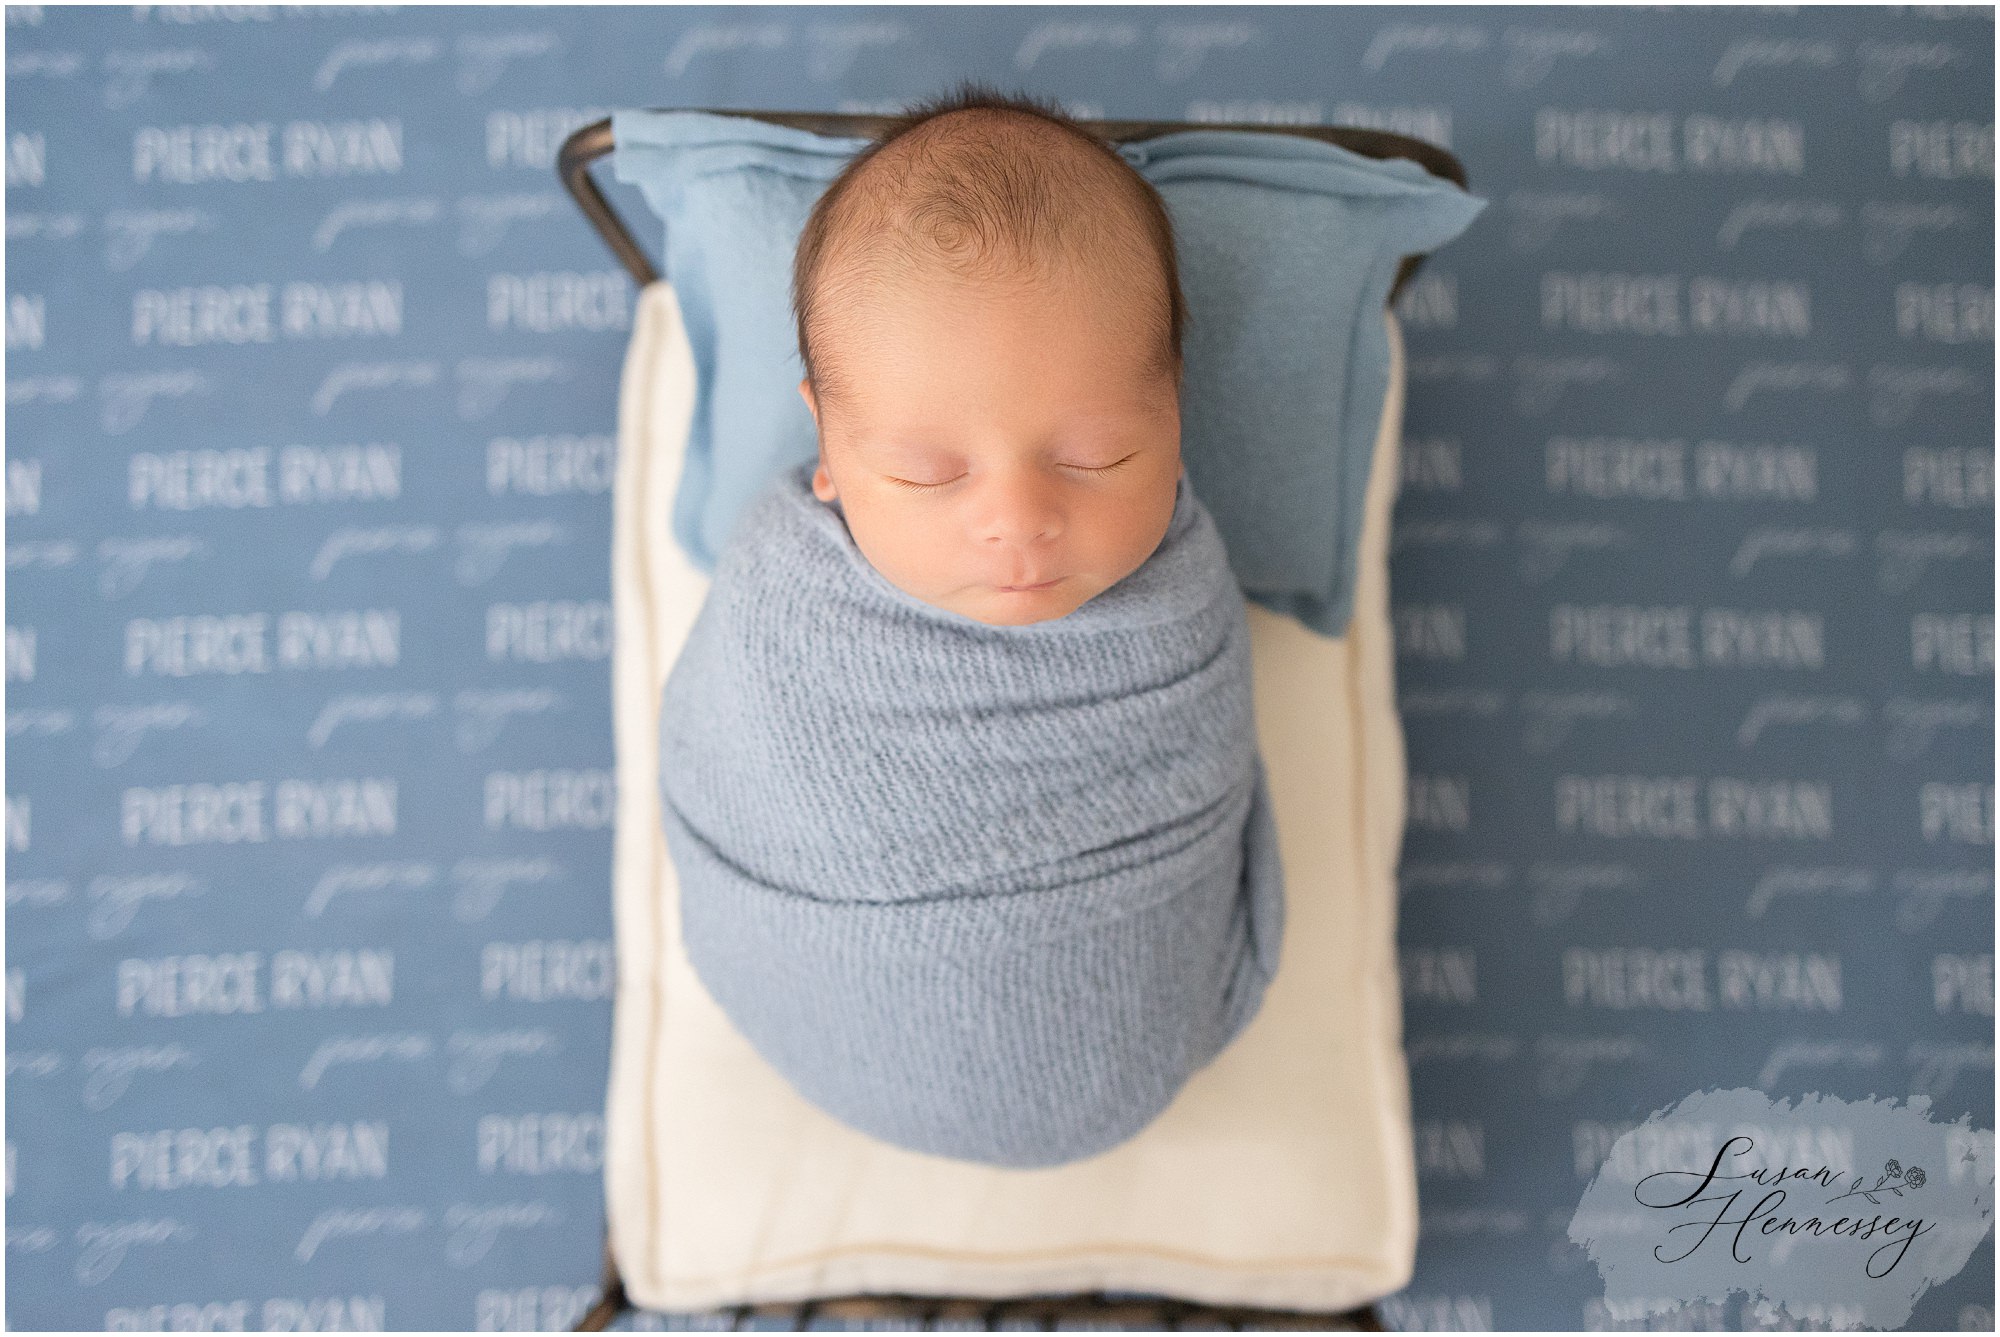 Newborn baby laying in bed for newborn session on caden lane blanket with his name on it. 